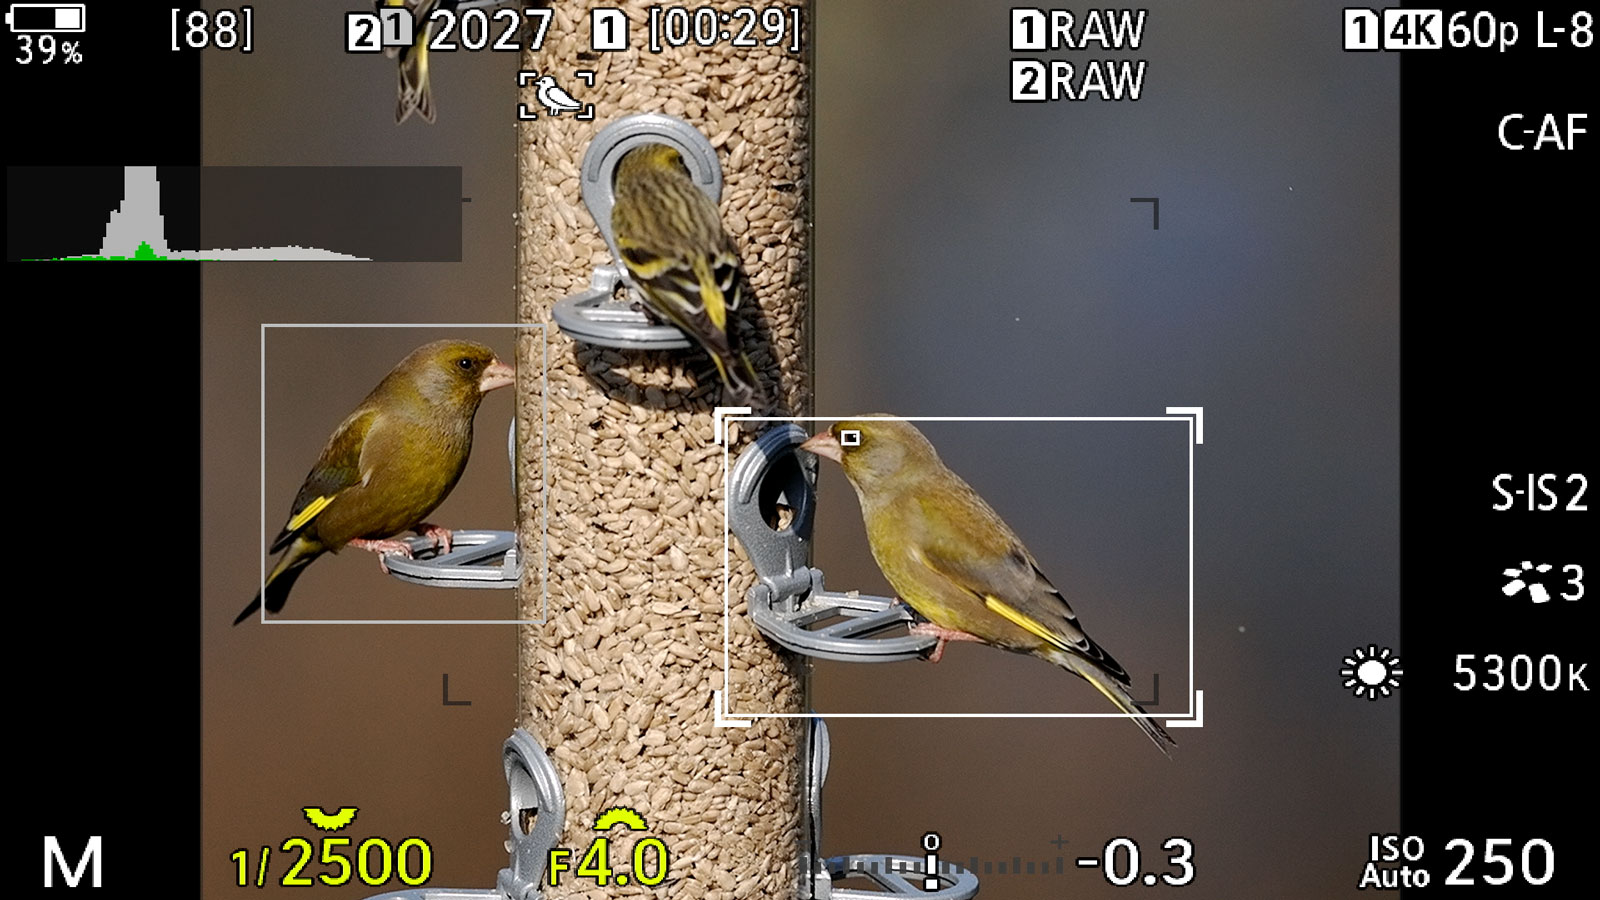 live view screen of the OM-1, showing bird detection on multiple small birds